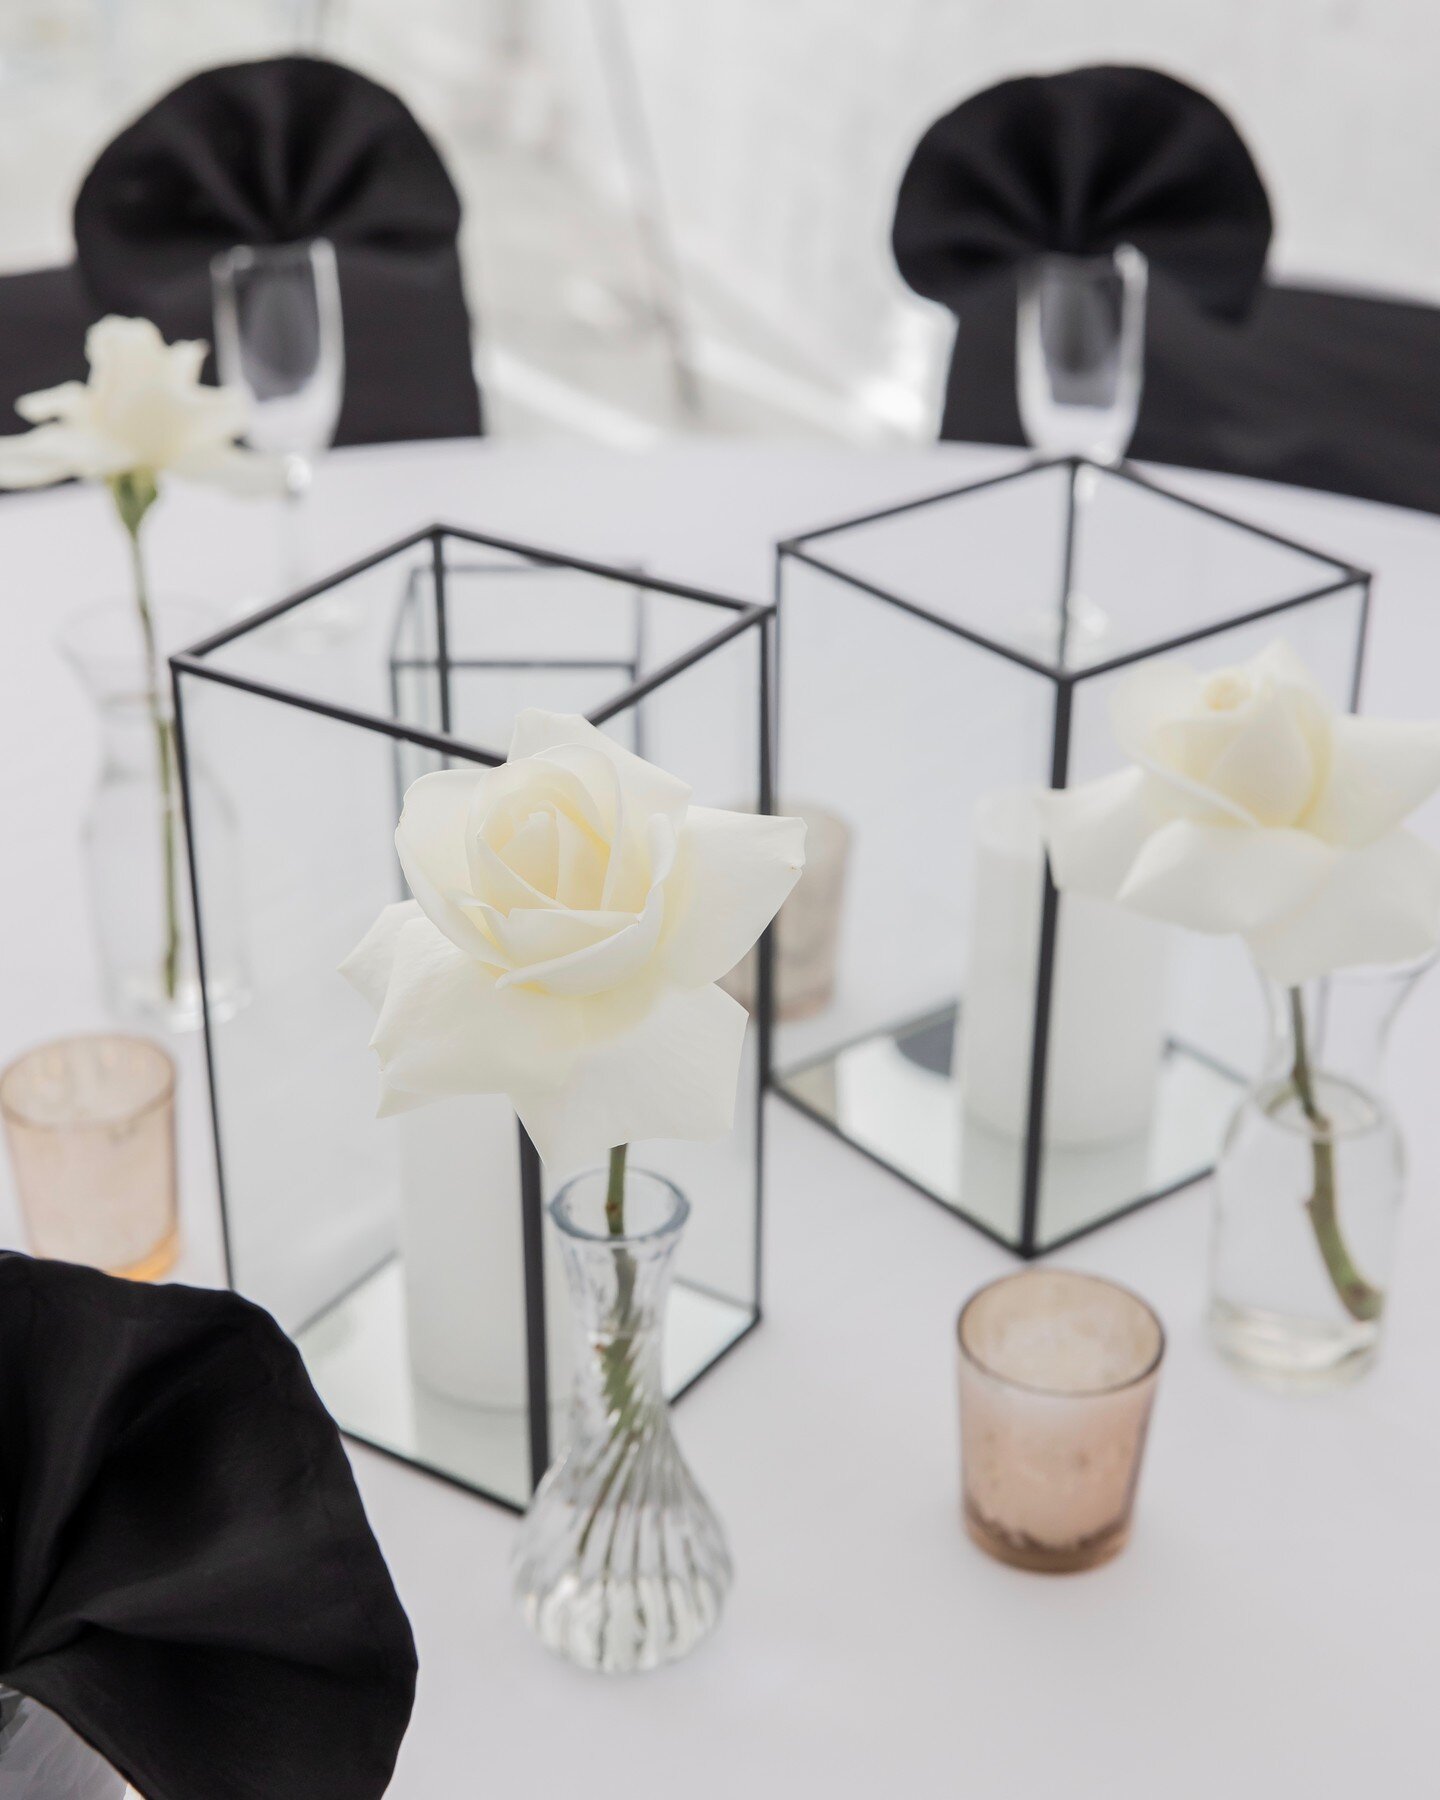 Keeping it simple and classy! These black terrariums create show stopping table decor that pair well with any event🖤 
*
*
*
#ohiopartyvenue #ohioeventspace #ohioeventvenue #bridetobe #ohwedding #kywedding #cincinnatiwedding #cincyvenue #cincyeventsp